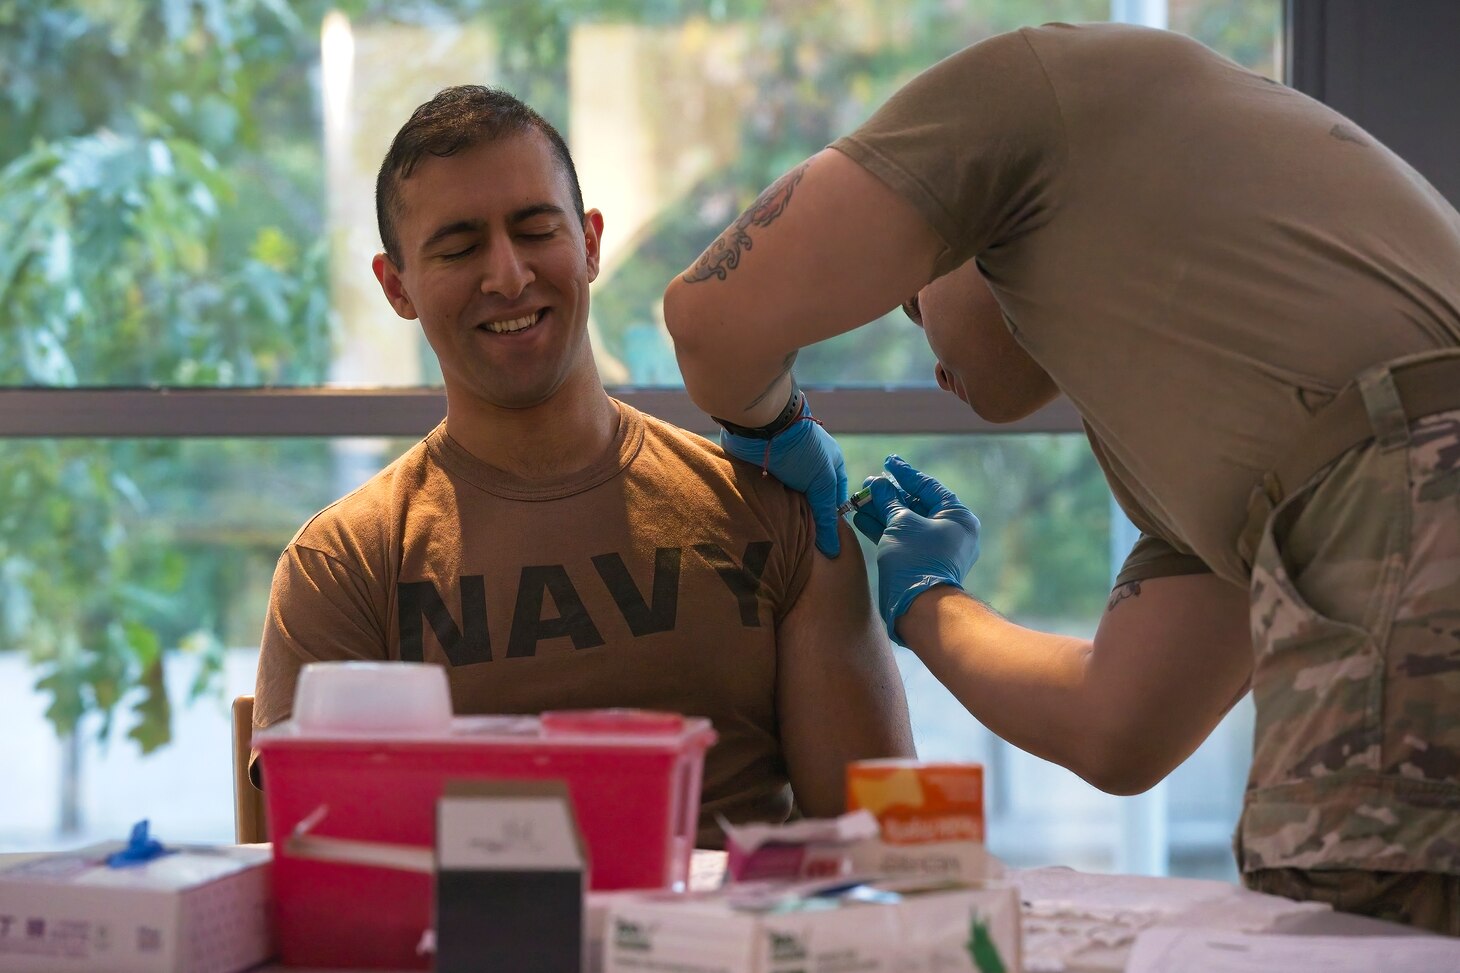 SILVER SPRING, Md. (Oct. 23, 2023) Lt. Rafae Khan, a Medical Corps officer from Naval Medical Research Command (NMRC), receives the seasonal flu vaccination. Flu vaccines were administered to military members and beneficiaries during a joint flu shot drive hosted by Walter Reed Army Institute of Research. NMRC conducts medical research, development, testing, evaluation and surveillance to optimize health, operational readiness and performance of Navy, Marine Corps and joint force personnel; delivering world-class, operationally-relevant medical solutions to enhance warfighter readiness through research & development. (U.S. Navy photo by Mike Wilson/Released)